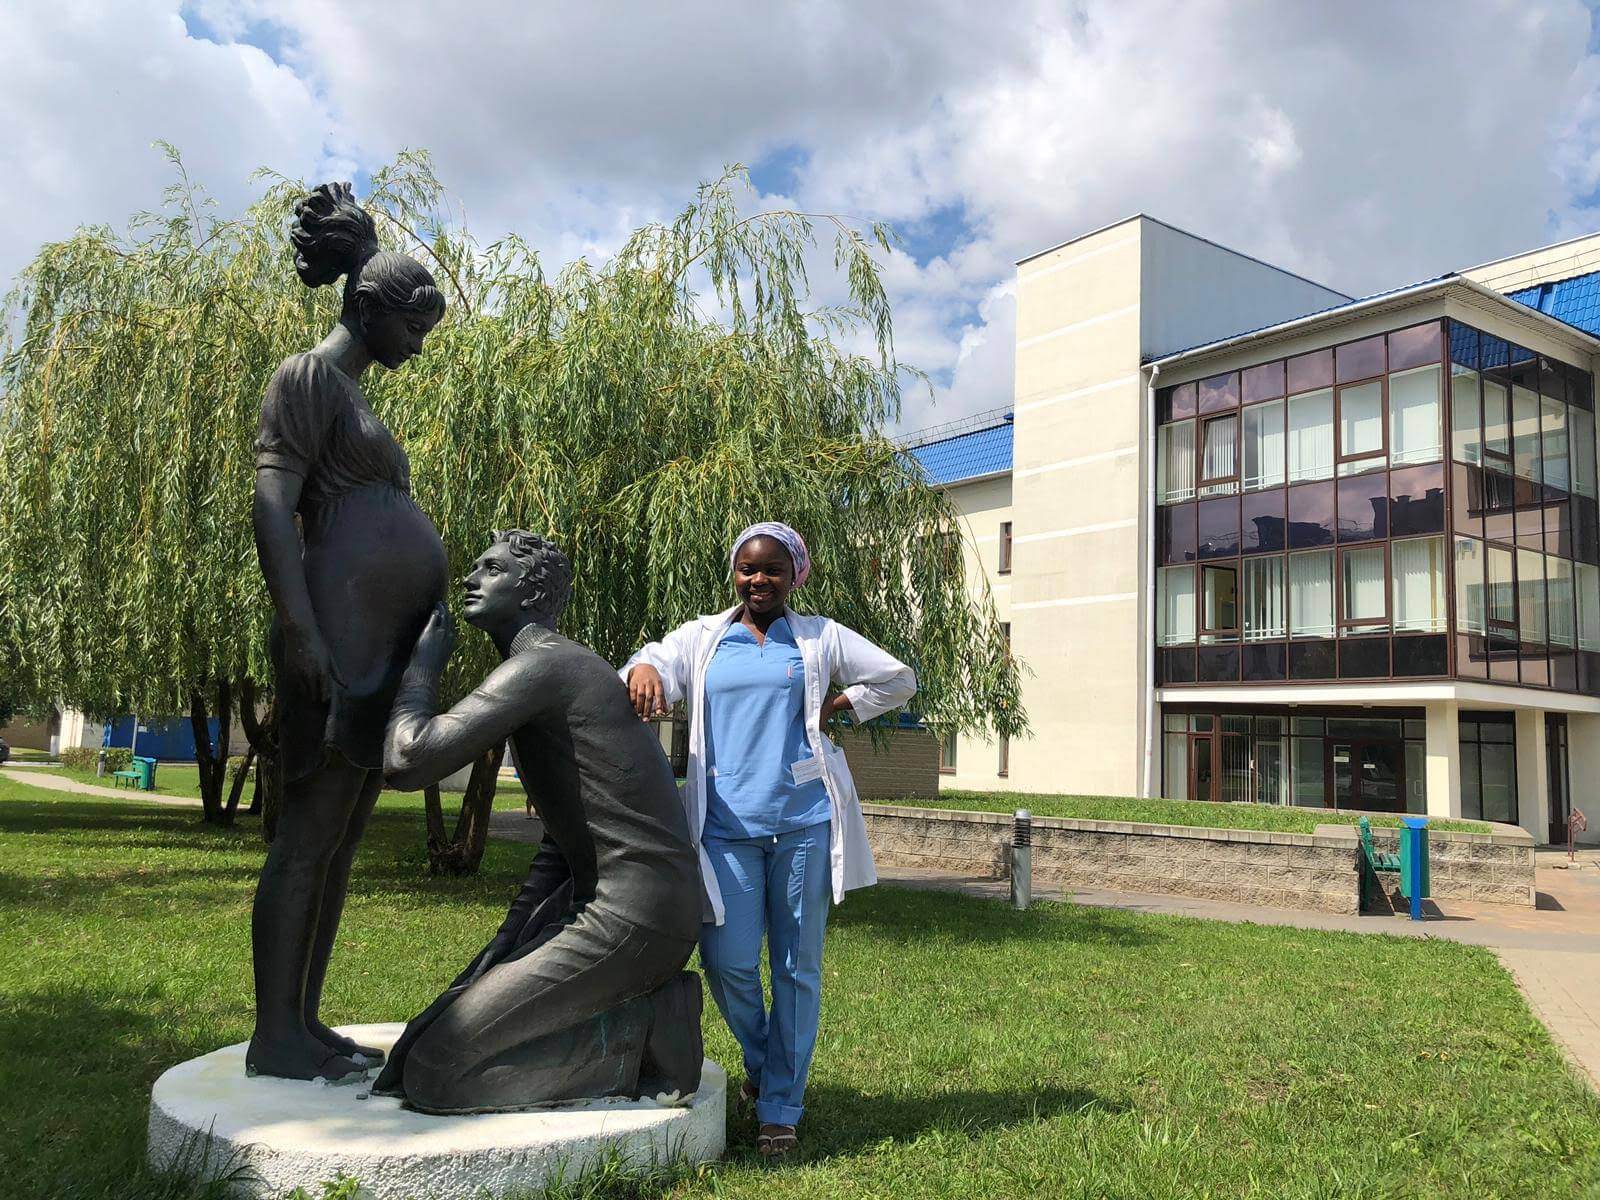 An unplanned pregnancy, debt: How this Nigerian defied all odds to become a doctor in Belarus